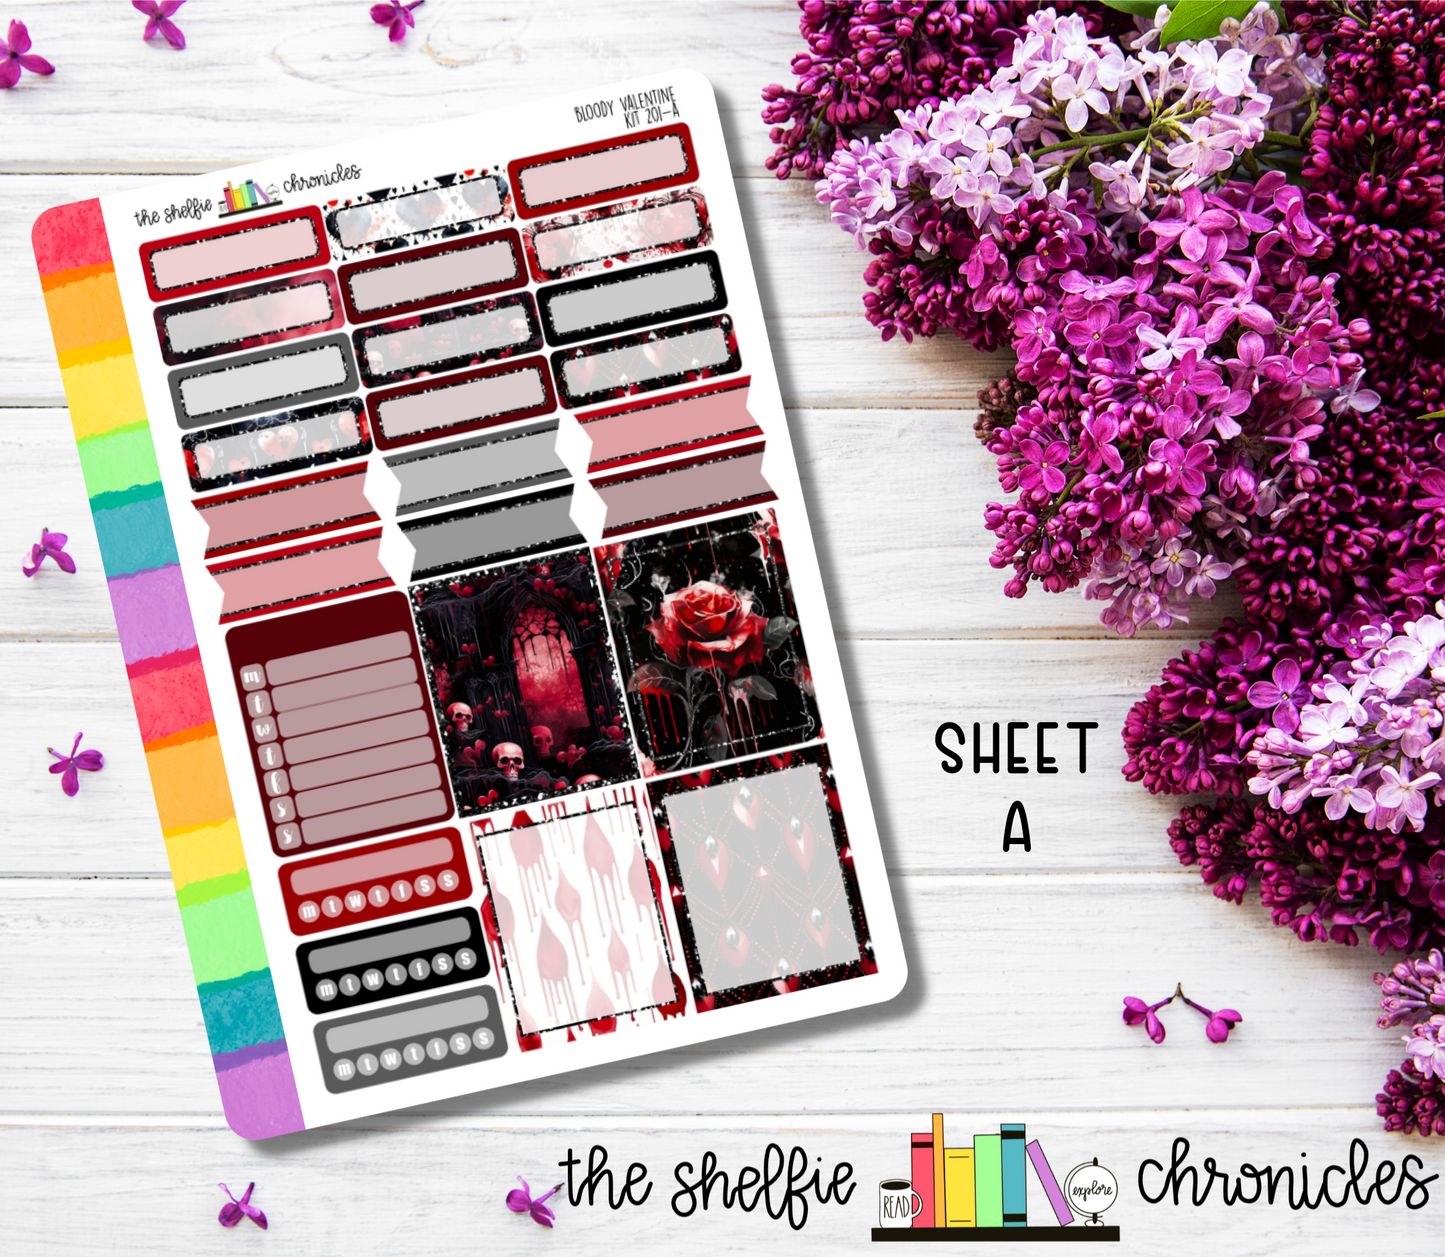 Kit 201 - Bloody Valentine Weekly Kit - Die Cut Stickers - Repositionable Paper - Made To Fit 7x9 Planners